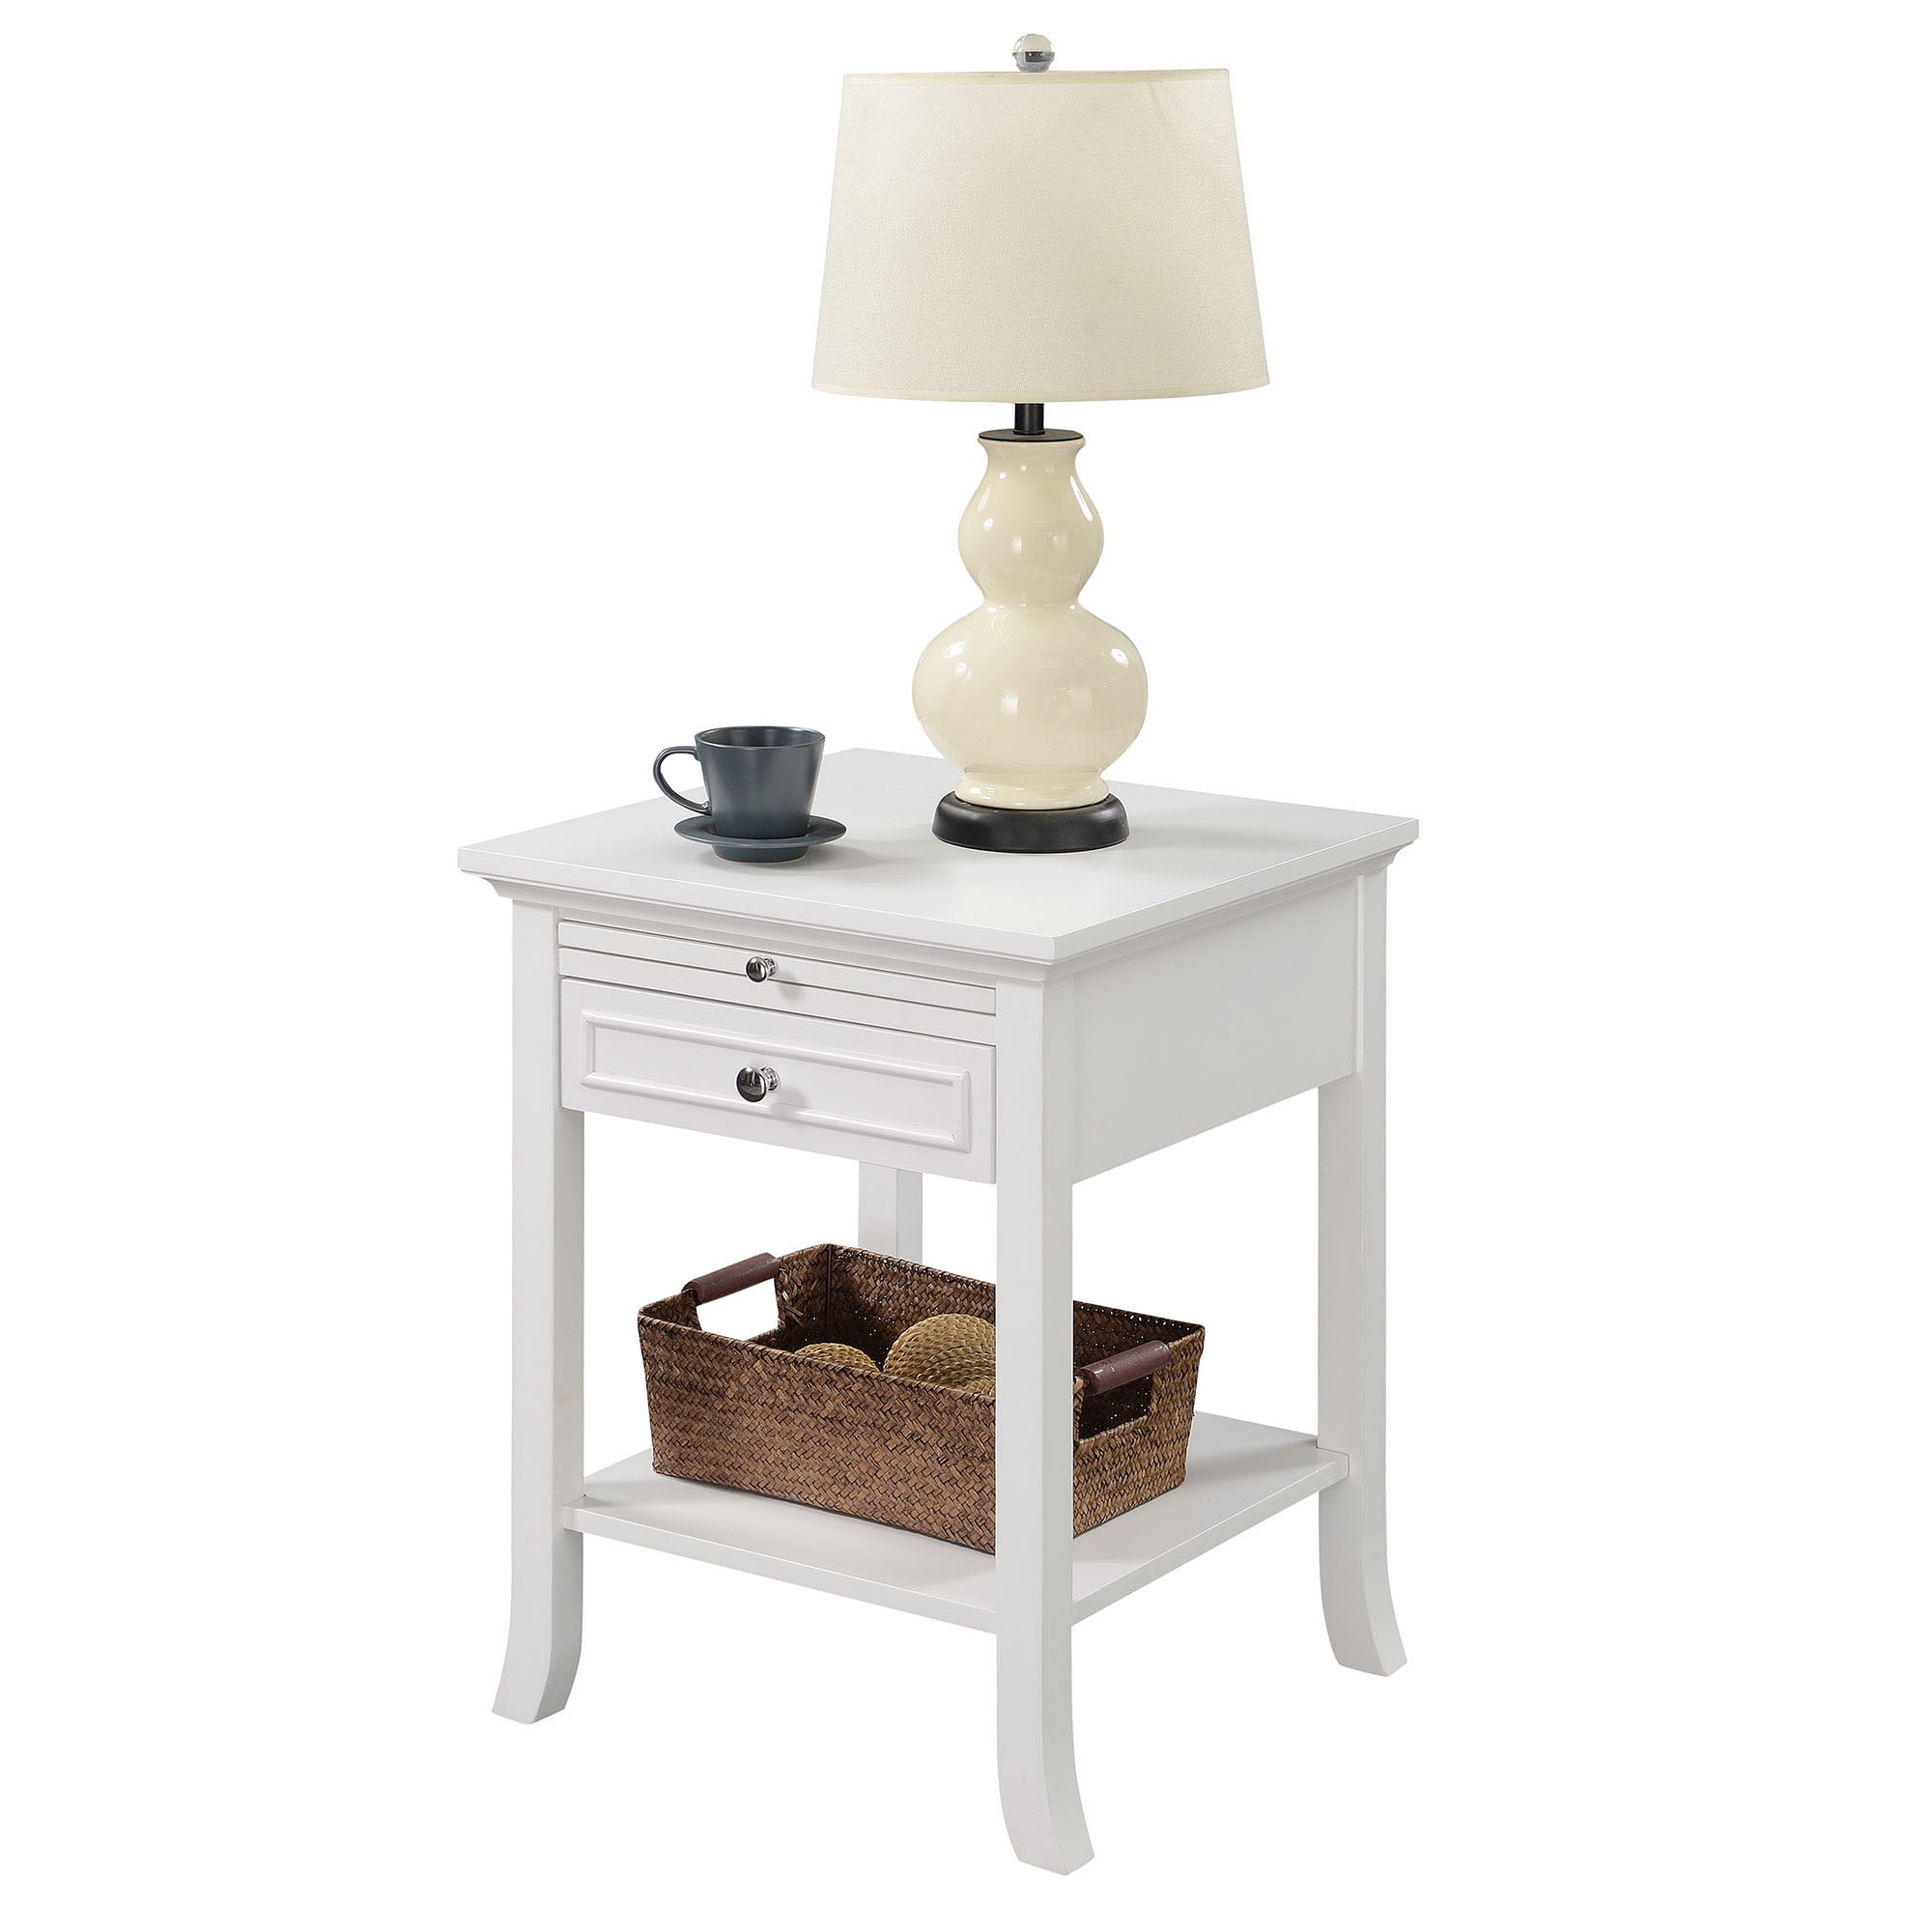 Brackett Plug-In Wood End Table with Storage Shelf 2 Drawers Nightstand Side Table Cabinet Bedside Furniture Wade Logan Color: White